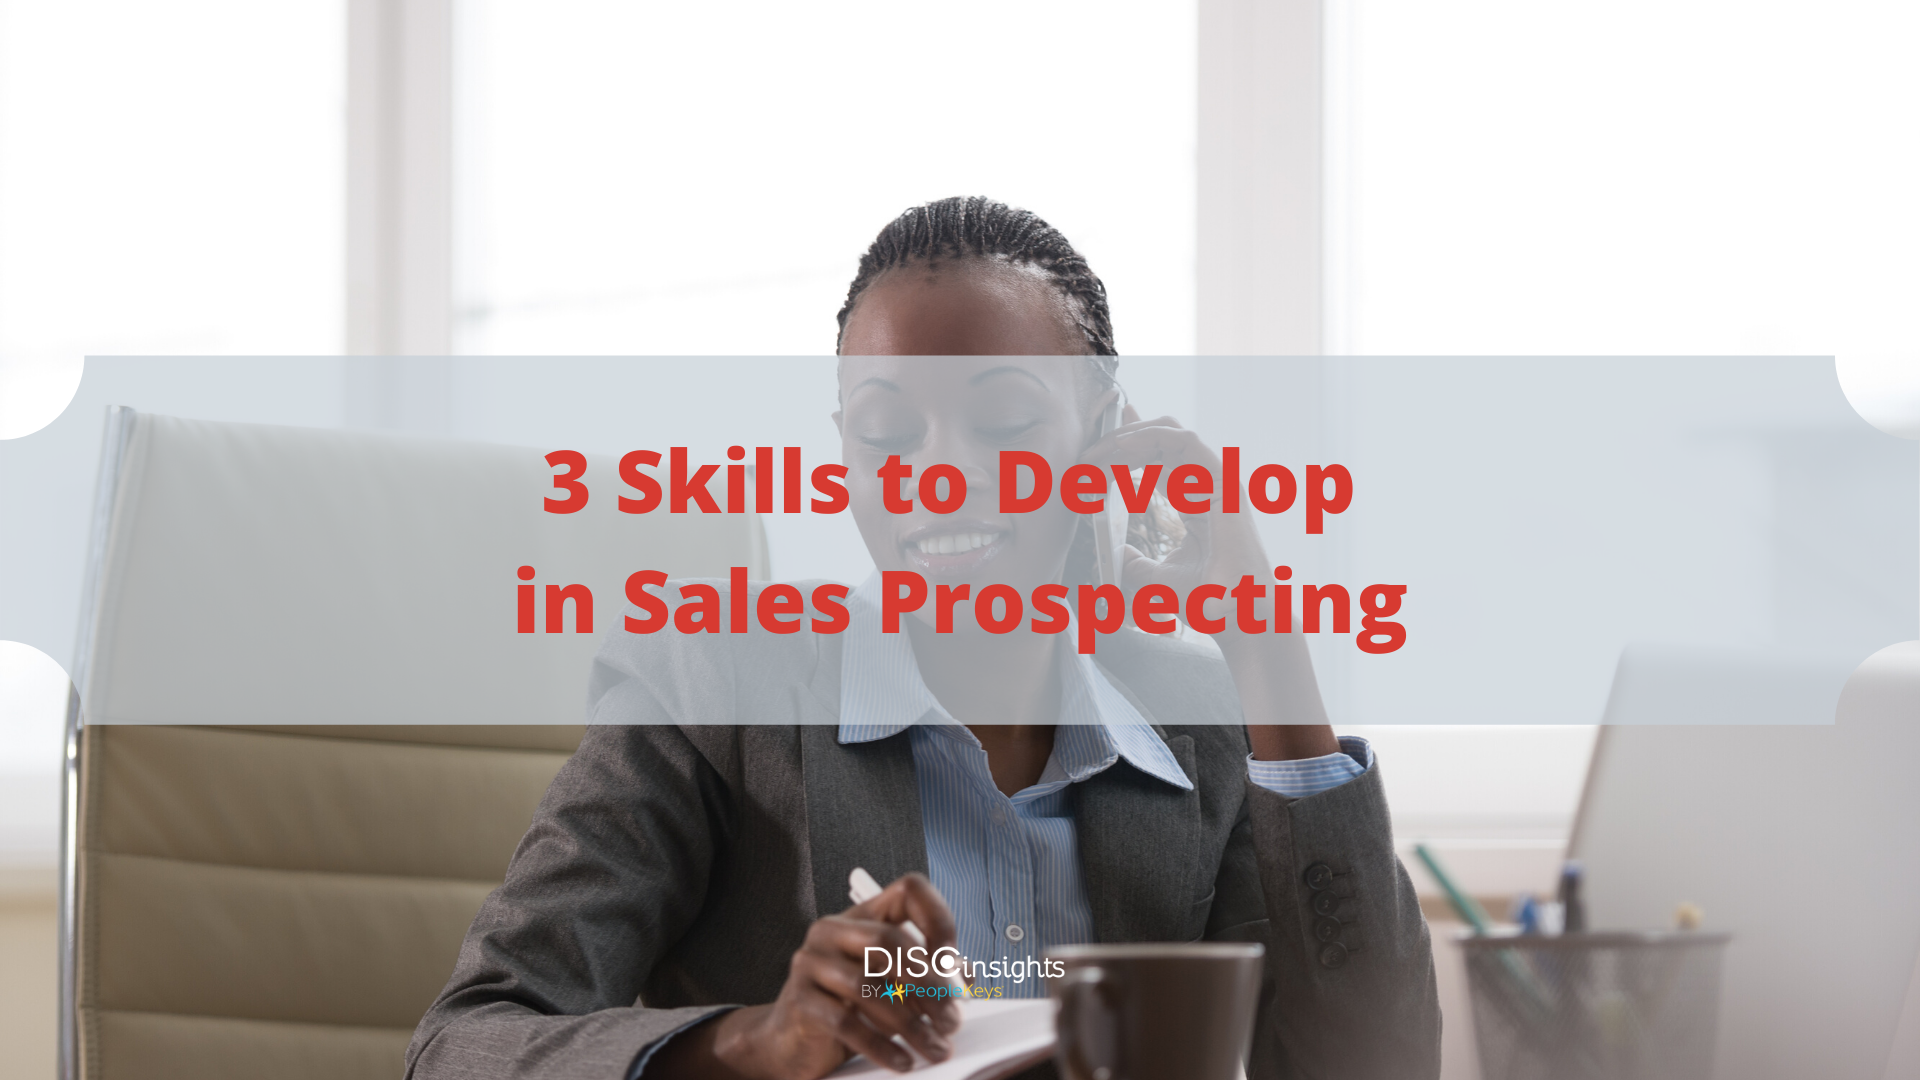 3 Skills to Develop in Sales Prospecting